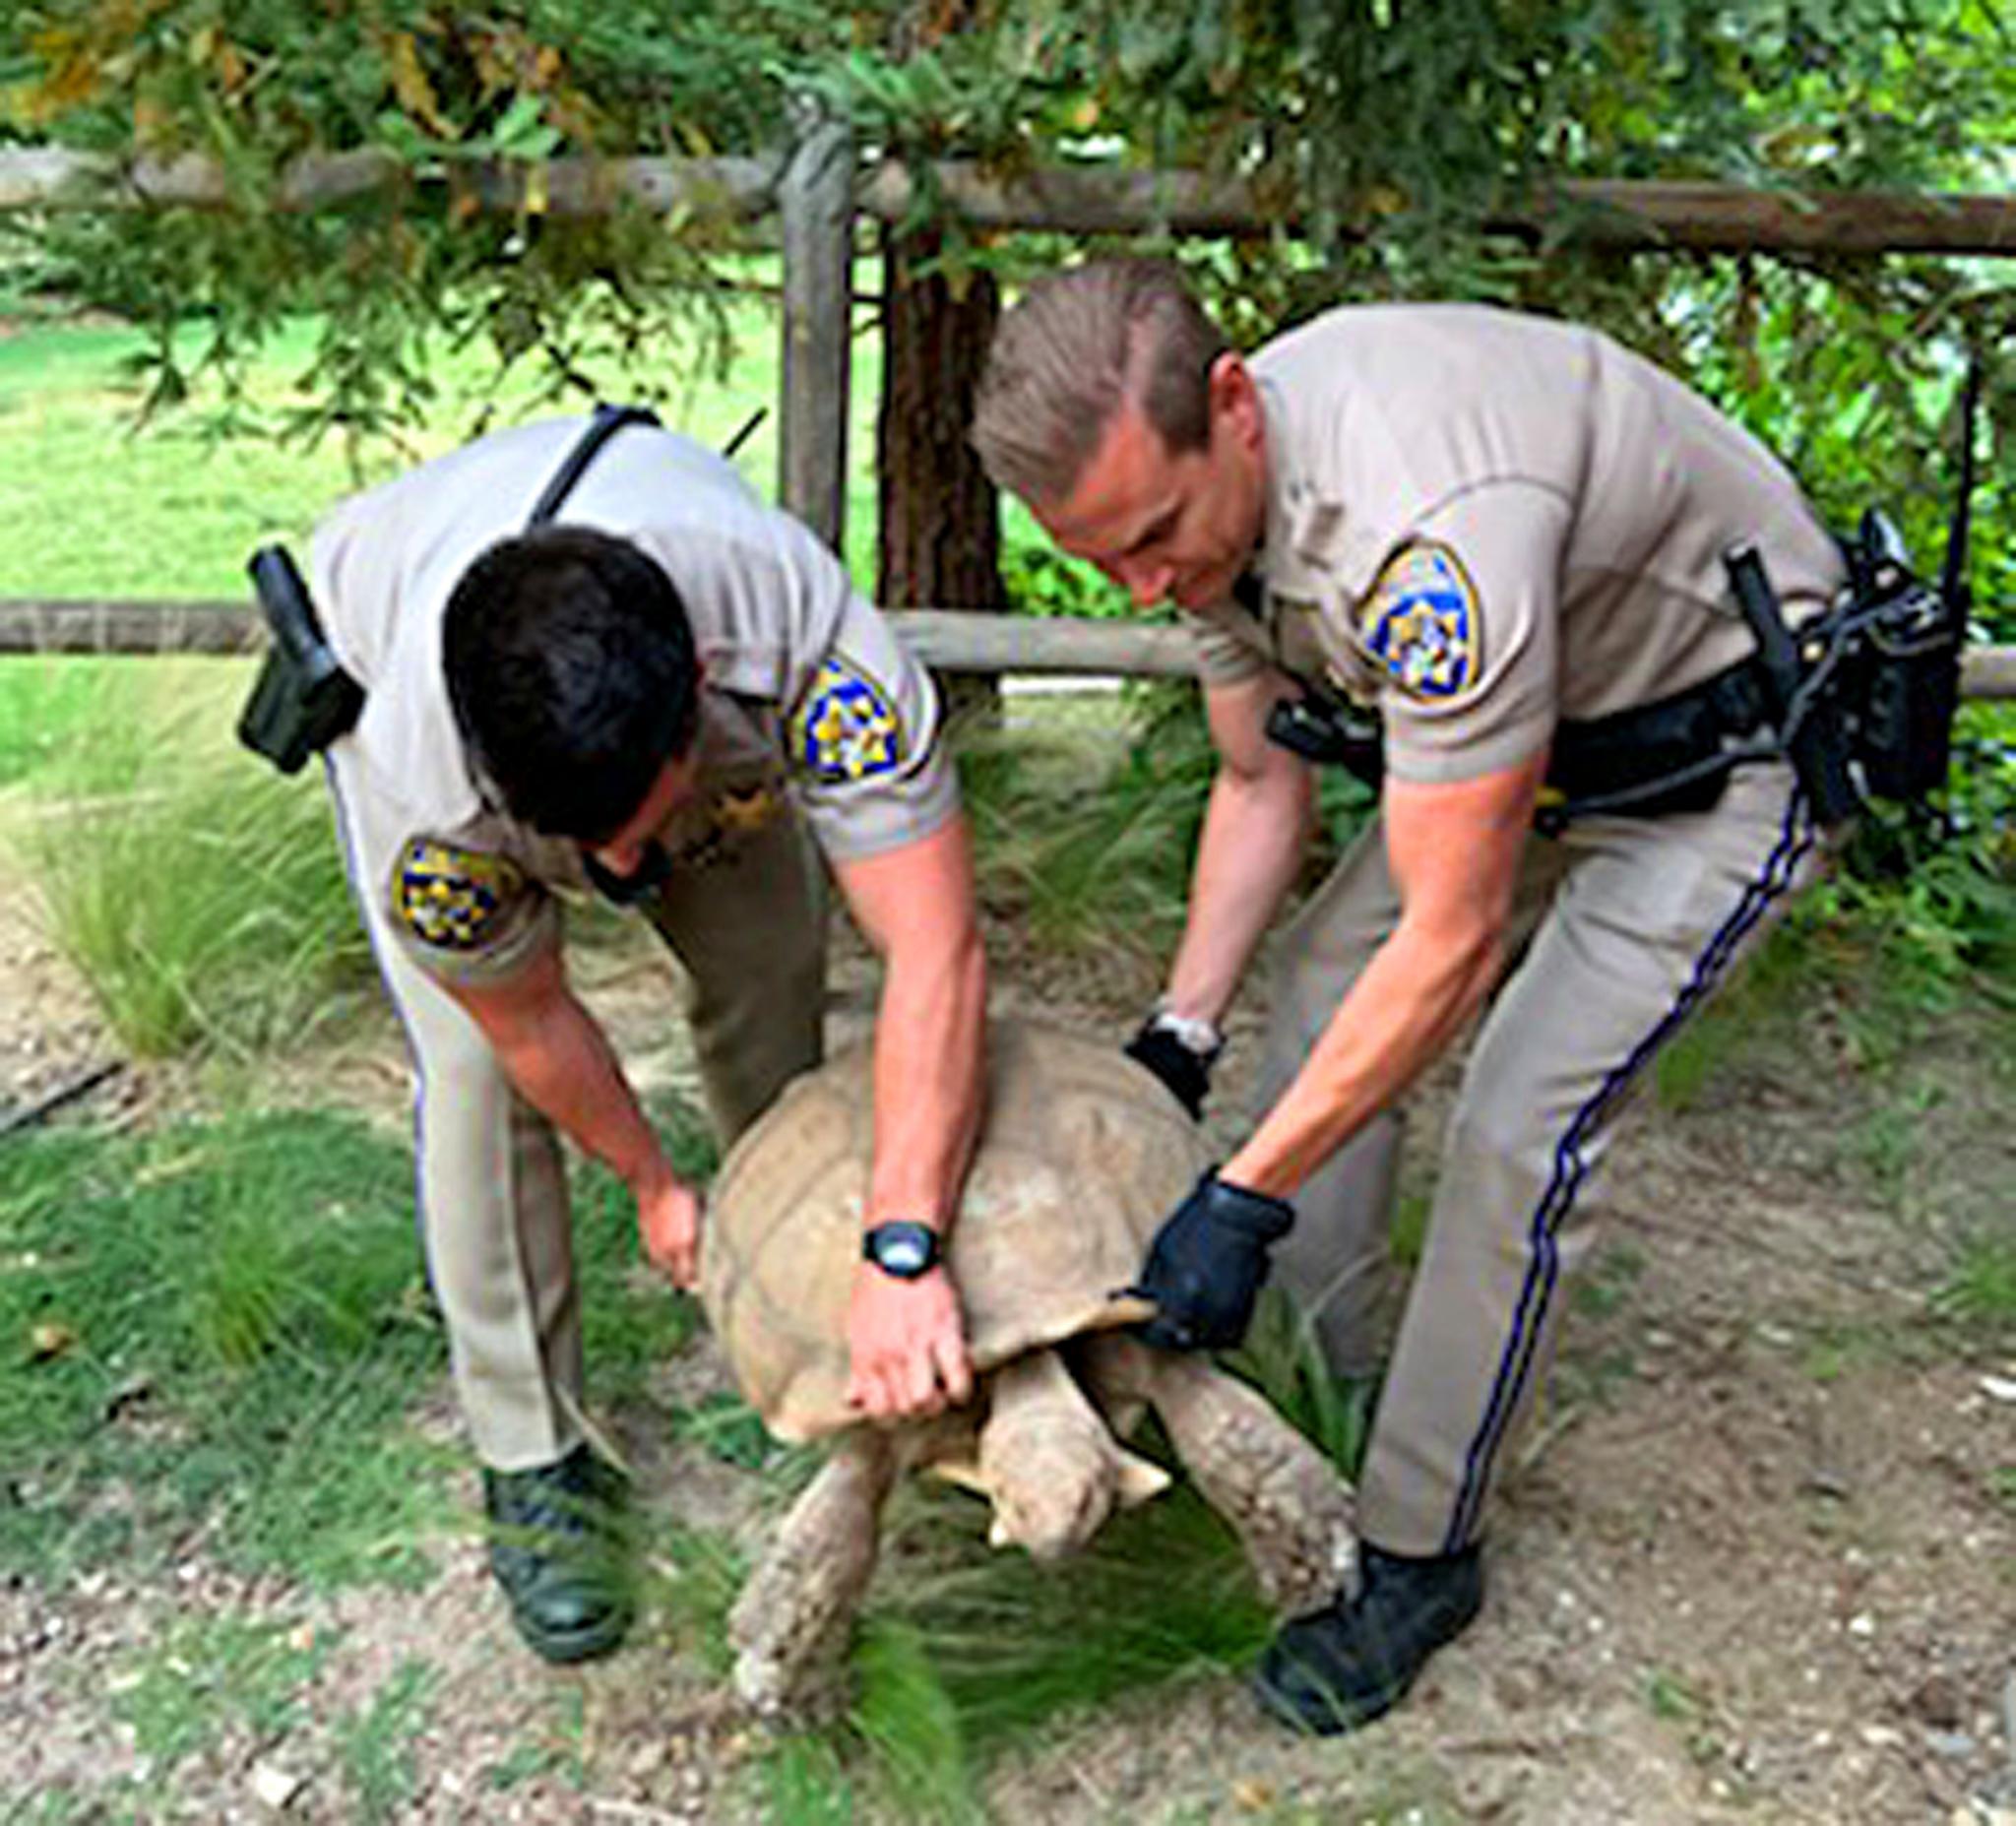 California Highway Patrol shows officers rescuing a 250-pound tortoise that wandered away from its home and was spotted on the shoulder of a road in Santa Ynez, California